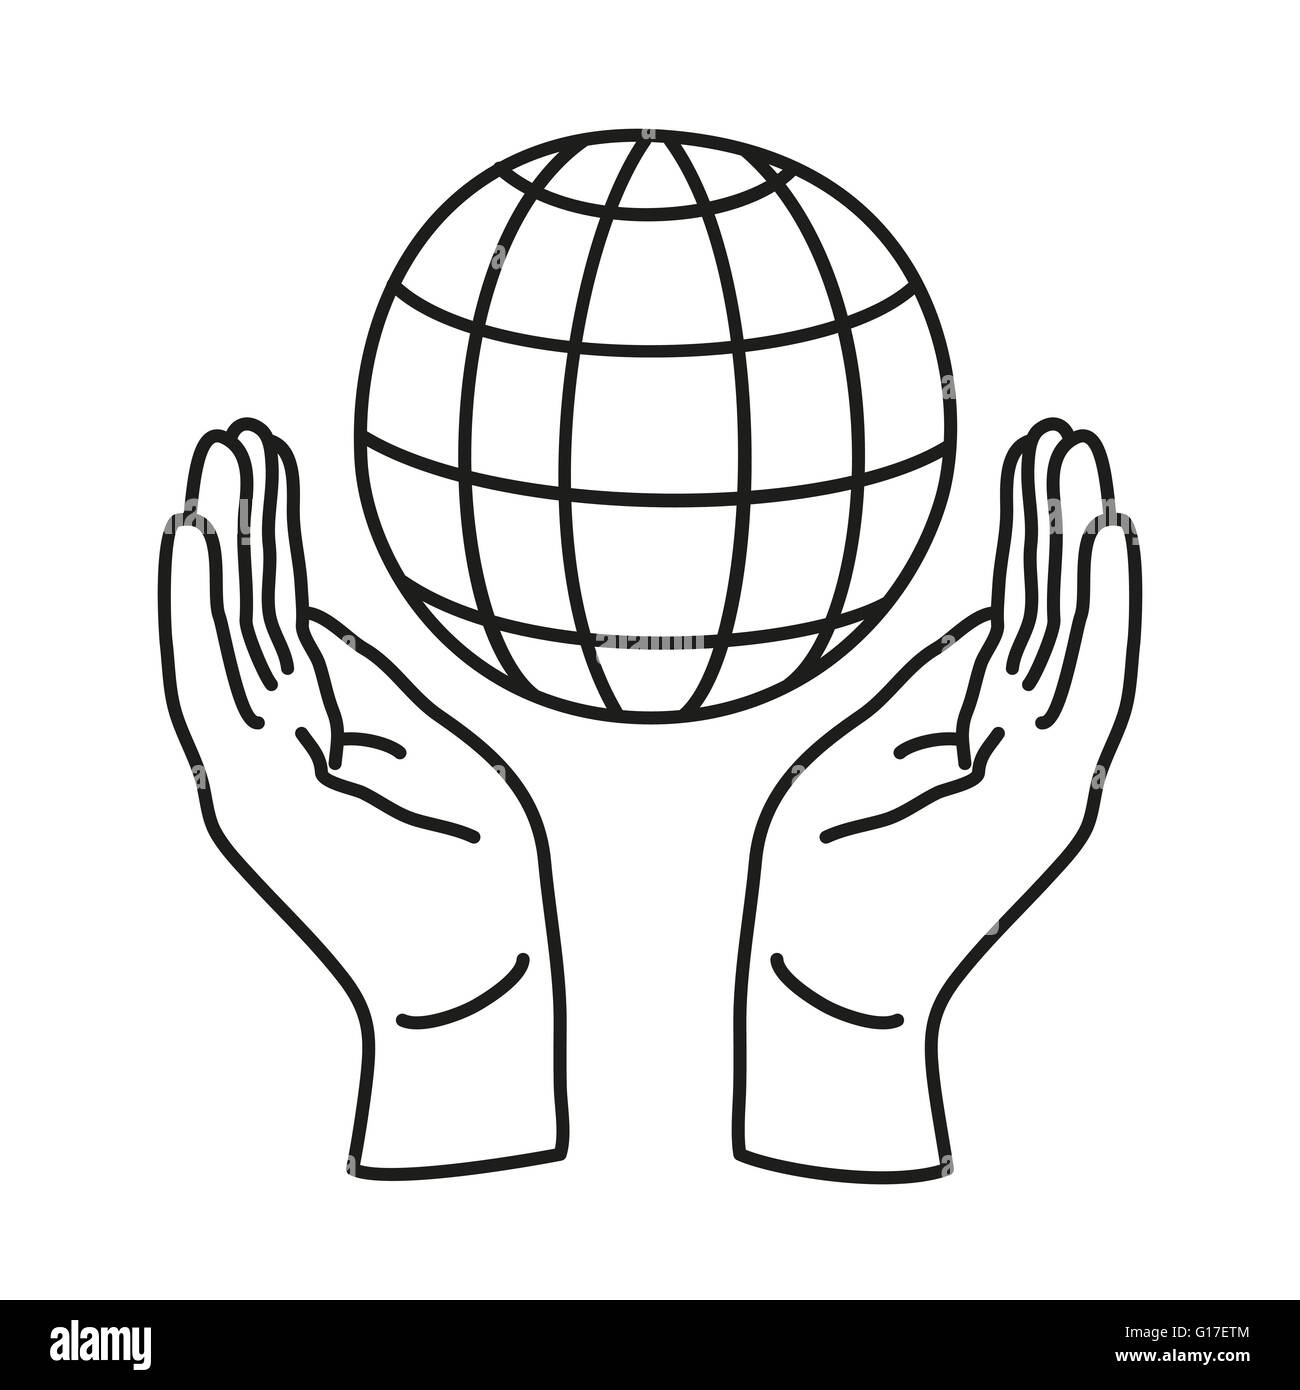 Hands Holding Earth Doodle High Resolution Stock Photography And Images Alamy